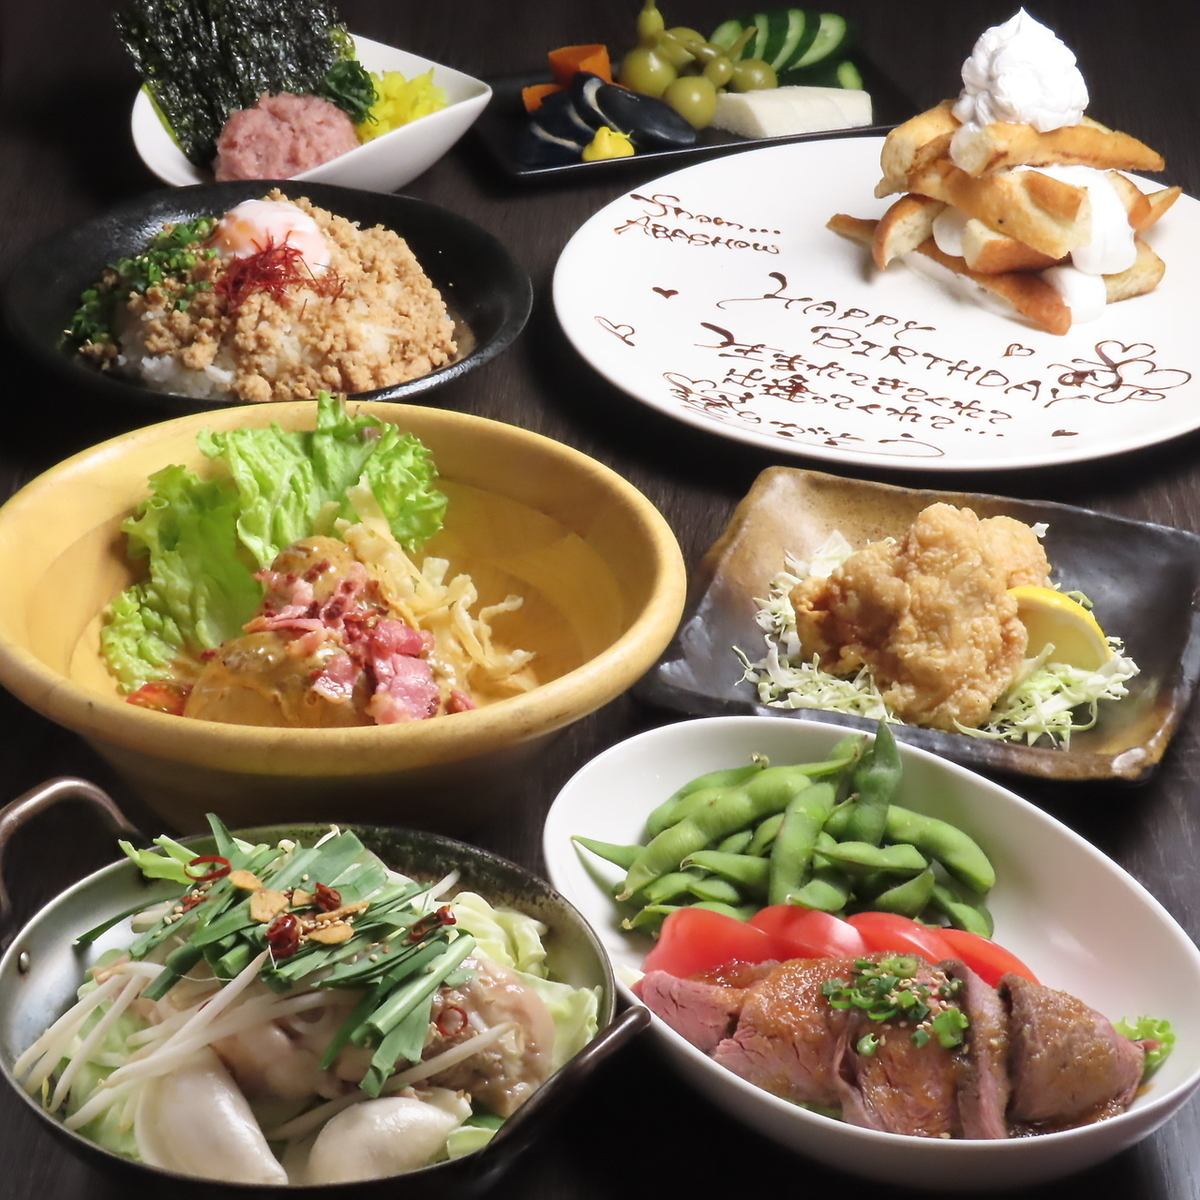 [Kamifukuoka x Izakaya] Fully equipped with private rooms! A shop with very popular anniversary plates